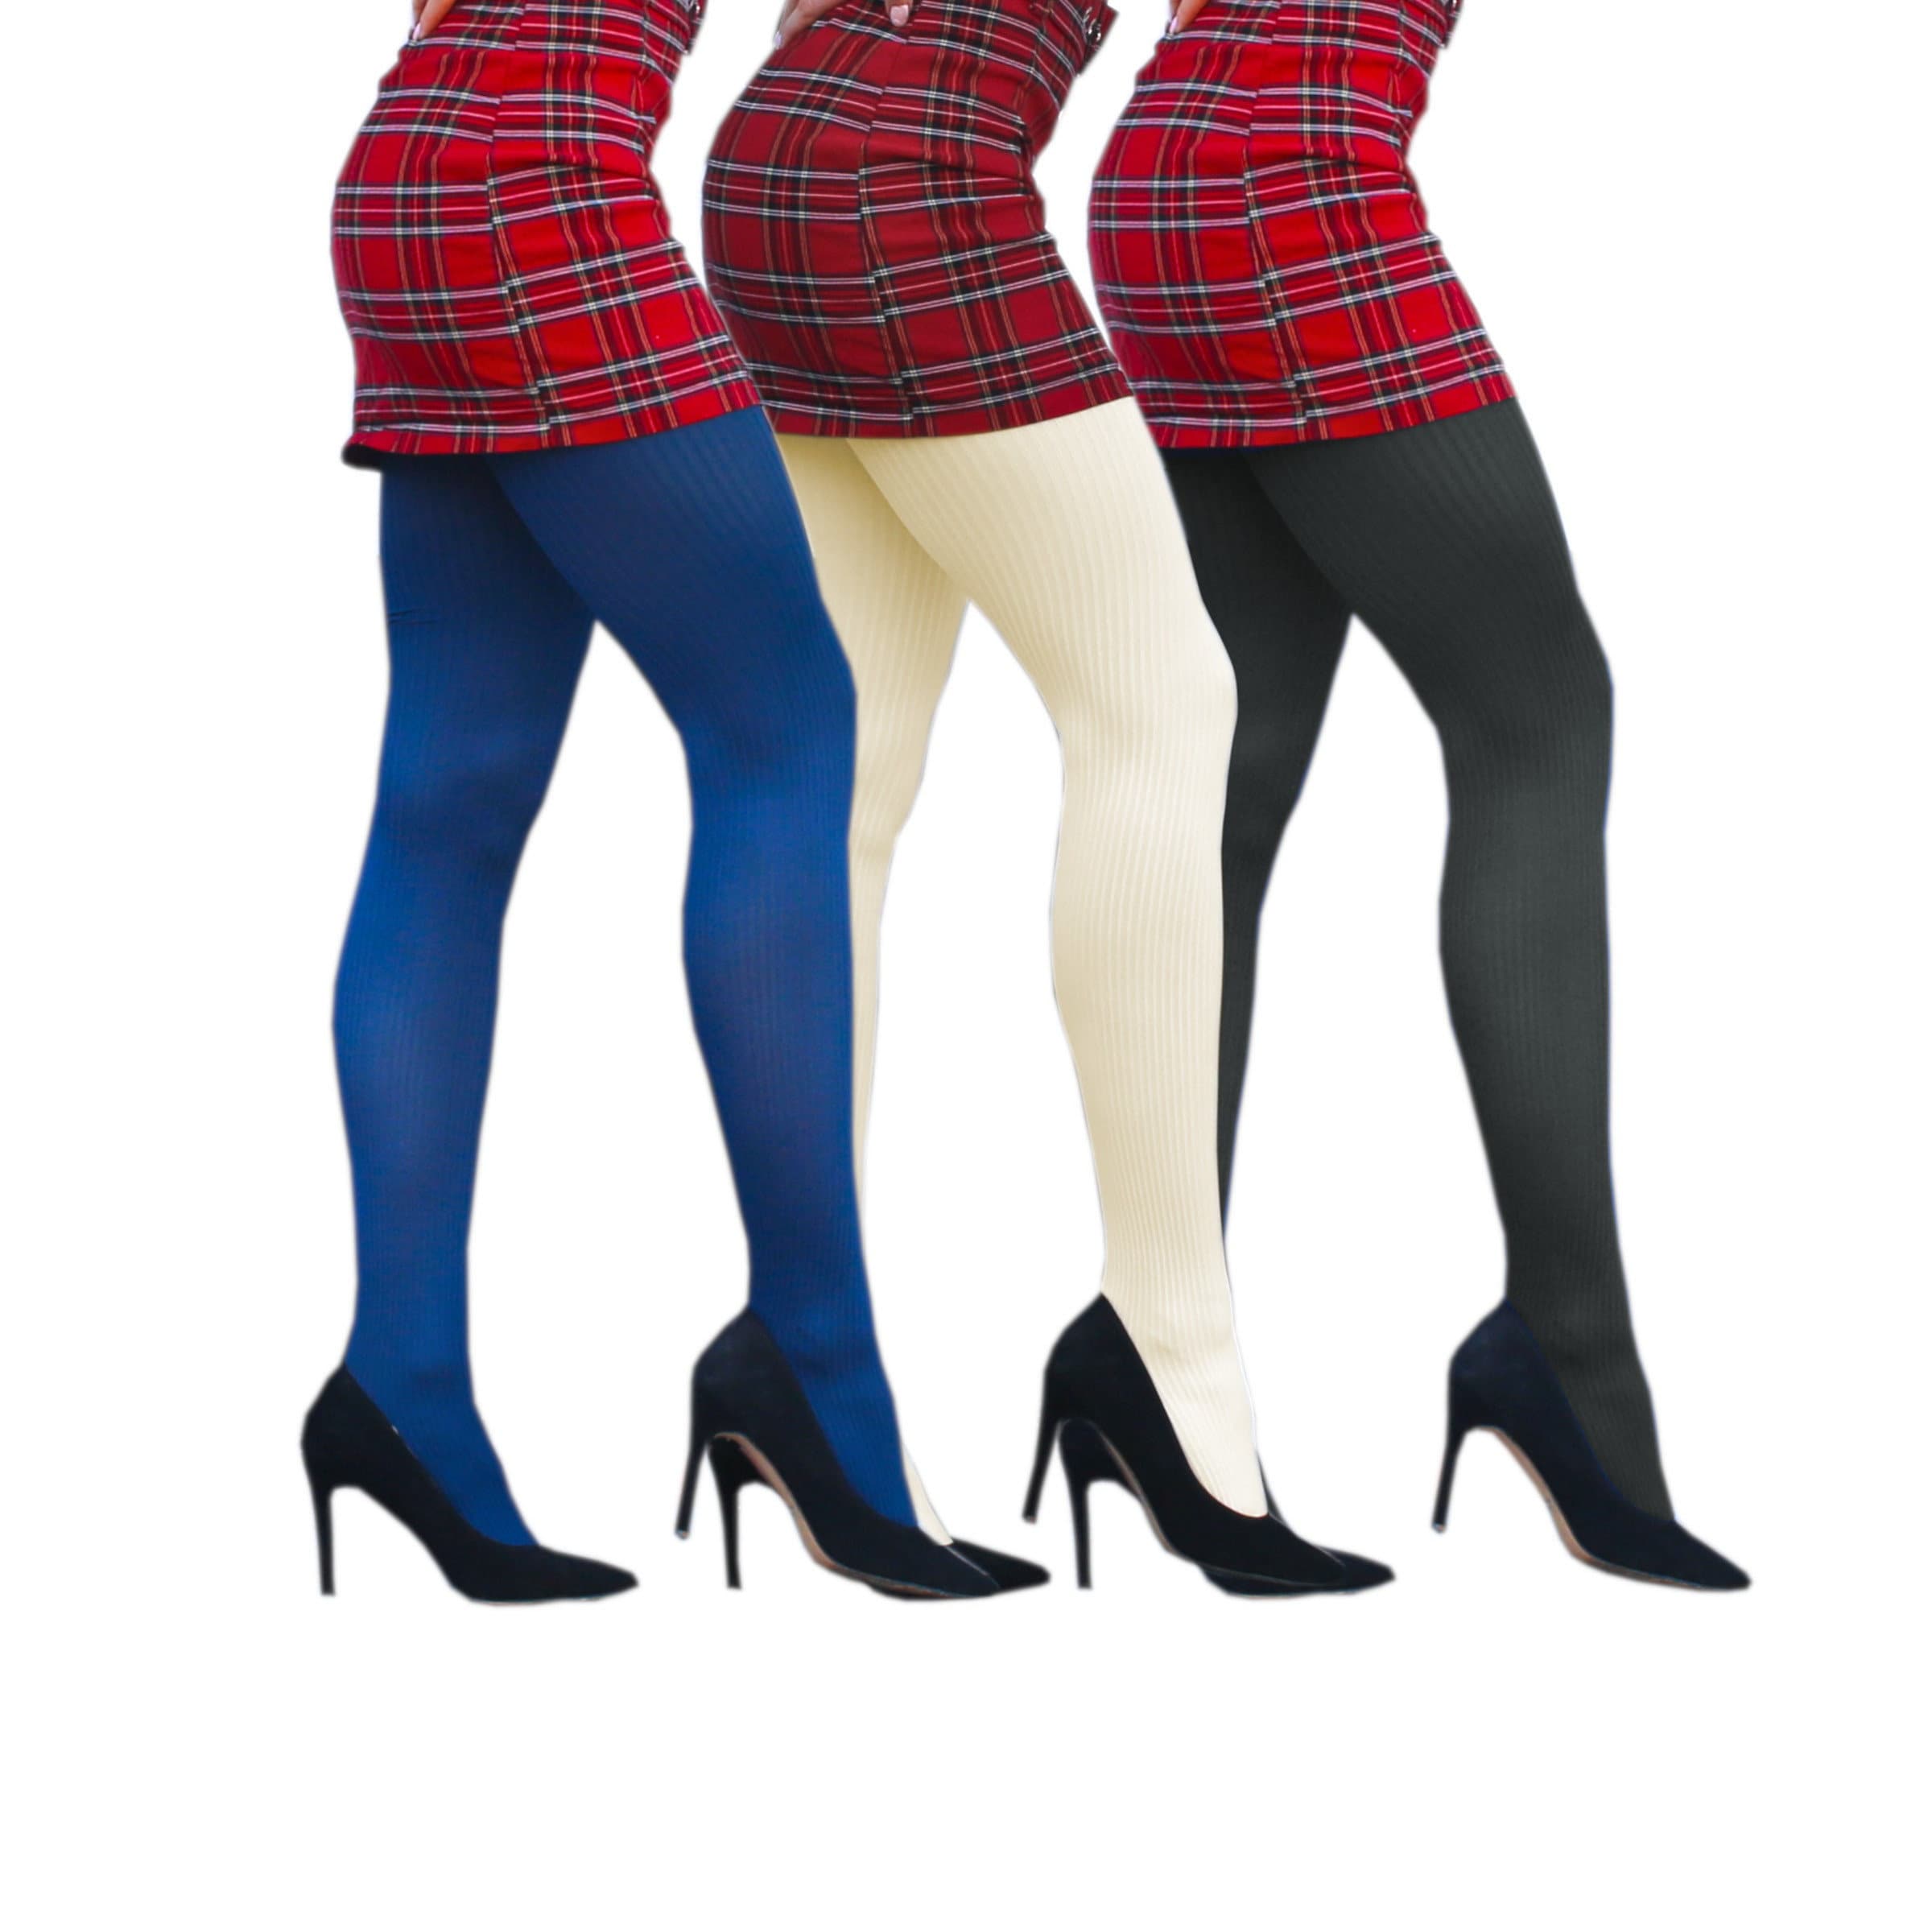 Opaque Navy Blue Tights Warm and Super Soft Pantyhose for Women